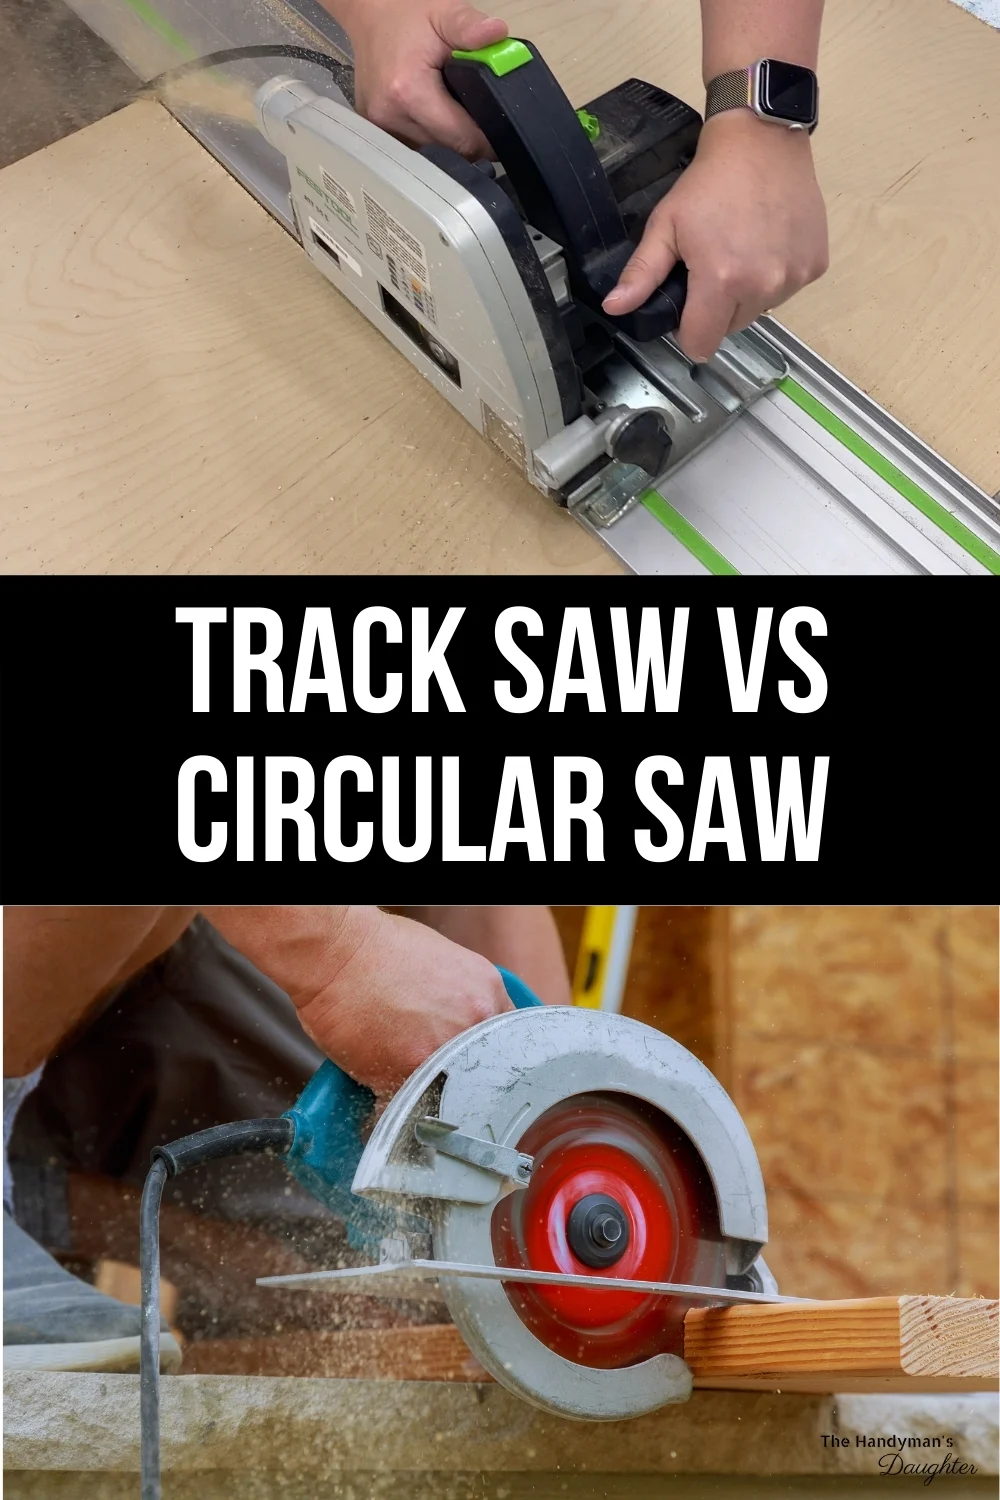 How to Clean Saw Blades for Better Cuts - The Handyman's Daughter